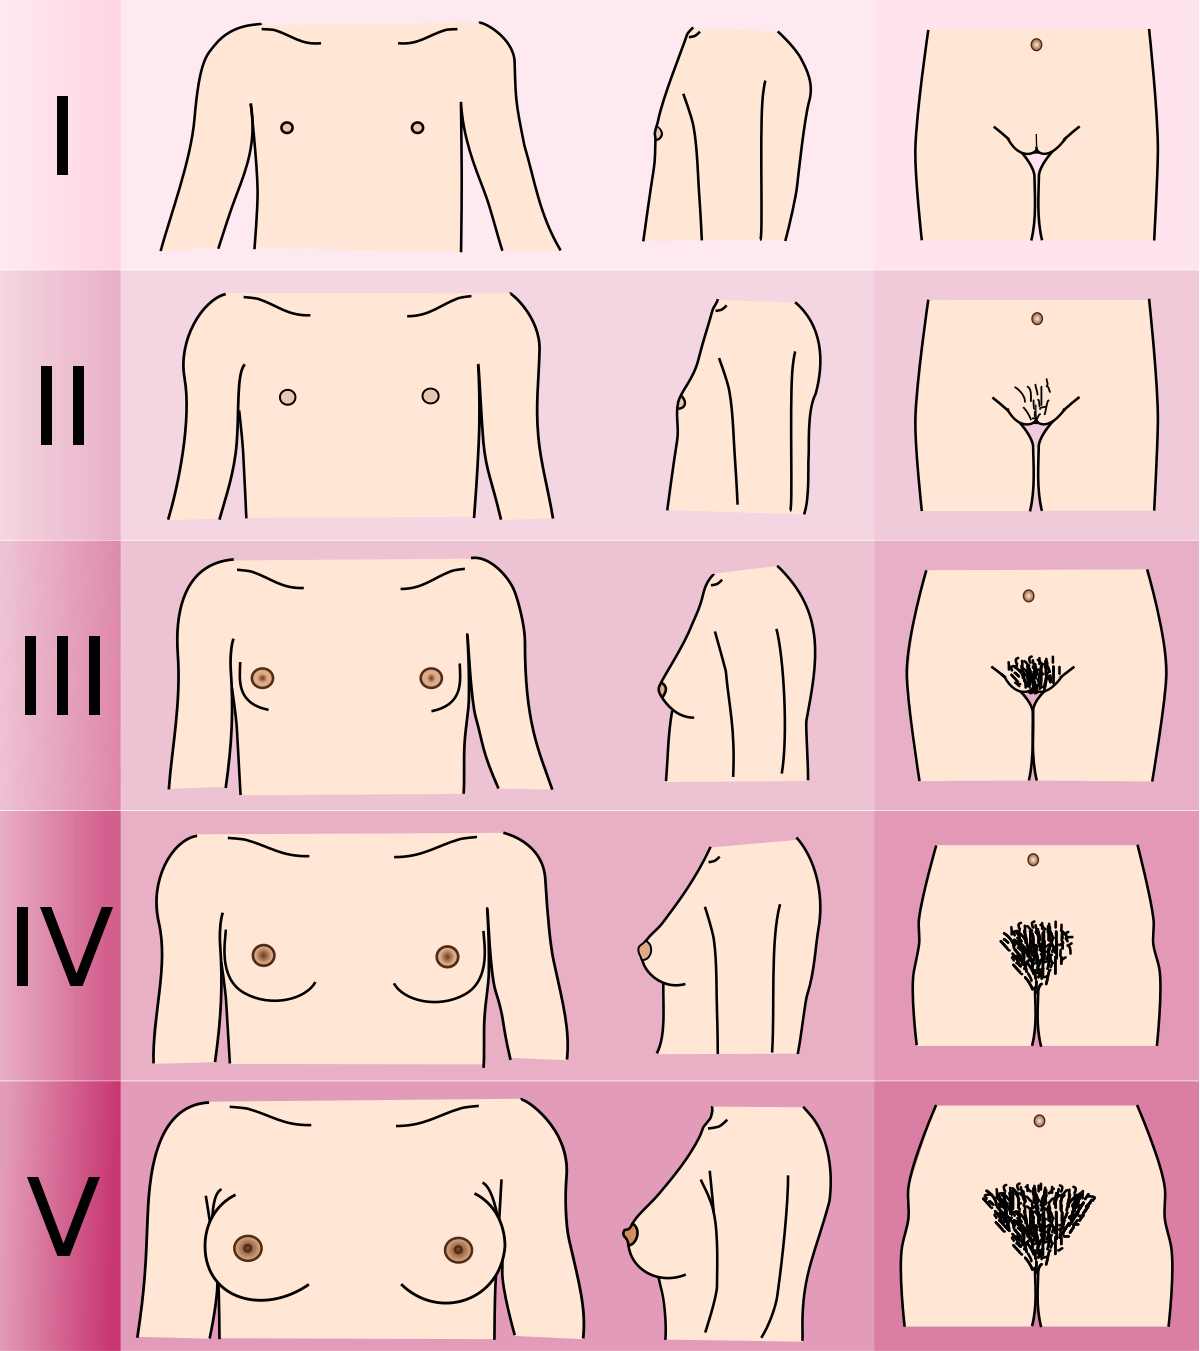 Maturing breasts normal or not